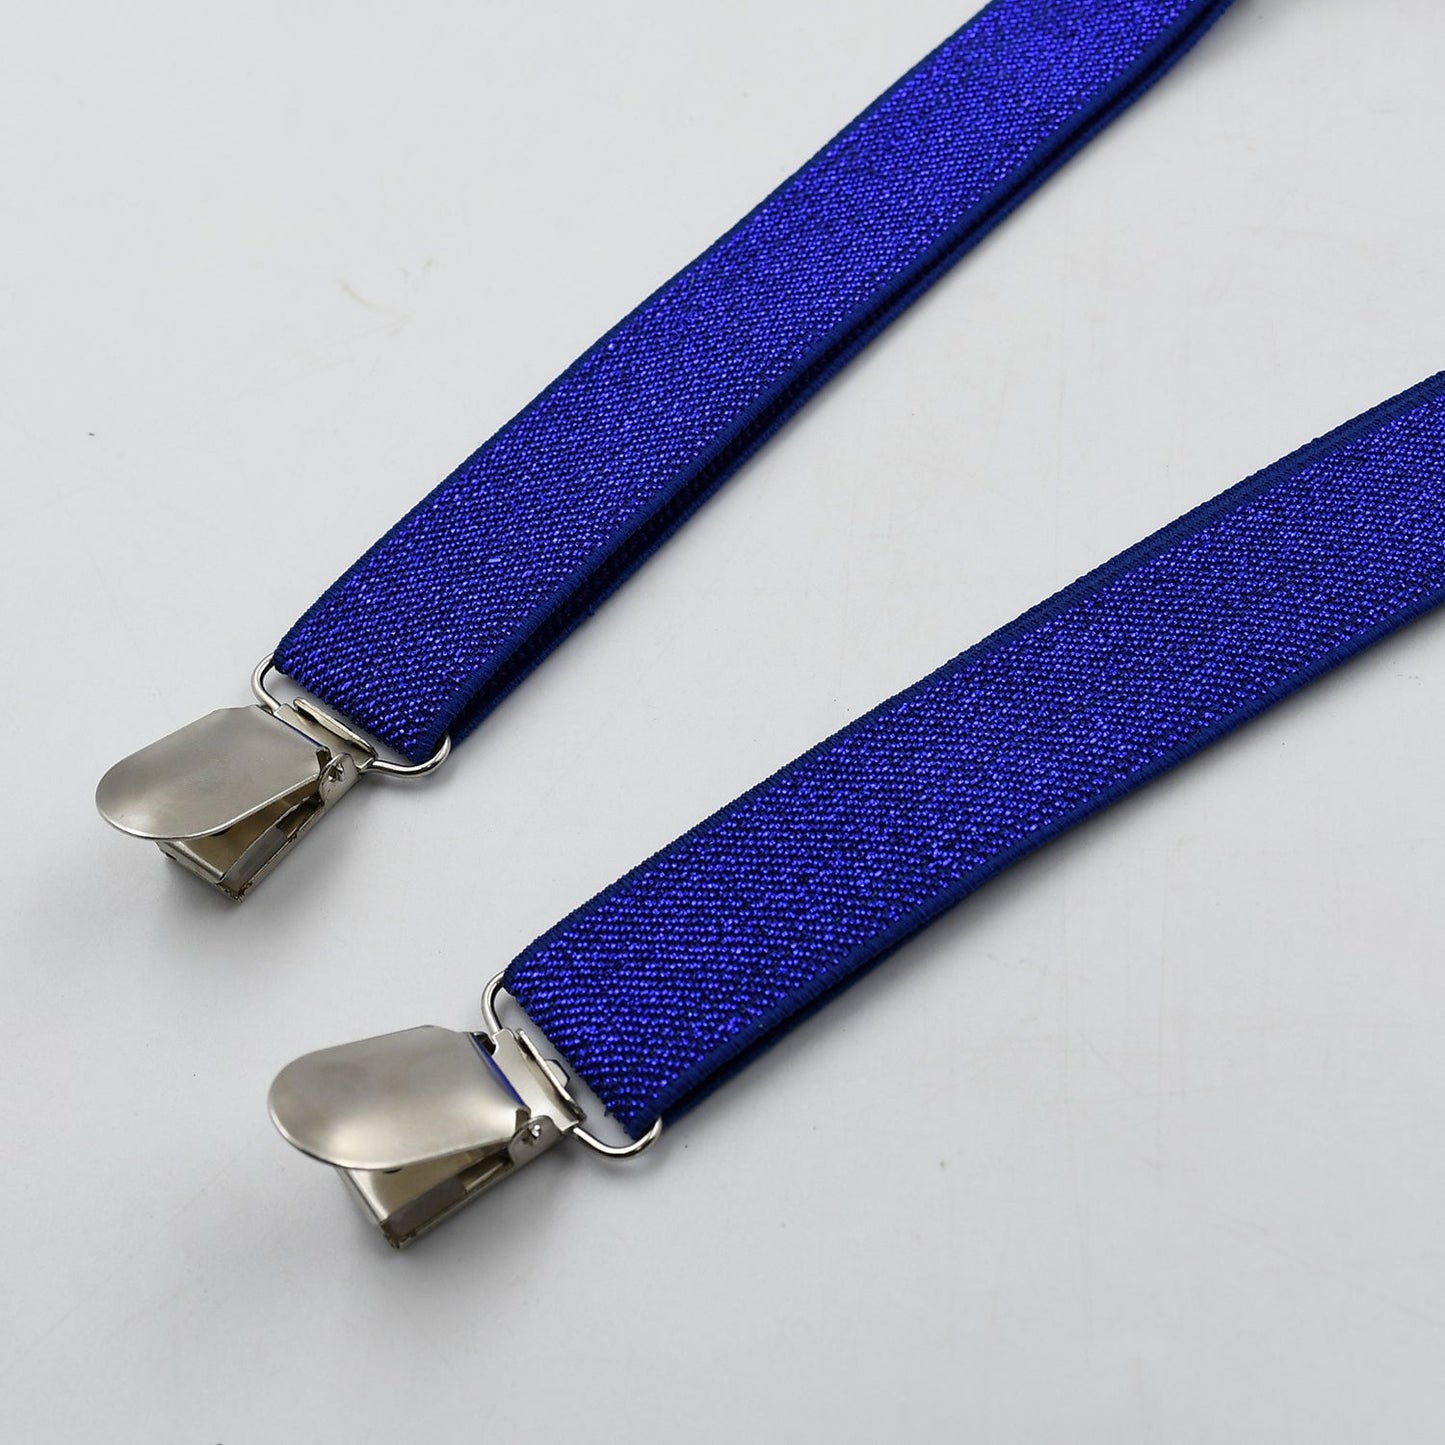 Royal Blue color suspenders belts stylish, Metal Clip Elastic Casual and Formal Suspenders for MEN boys women girls